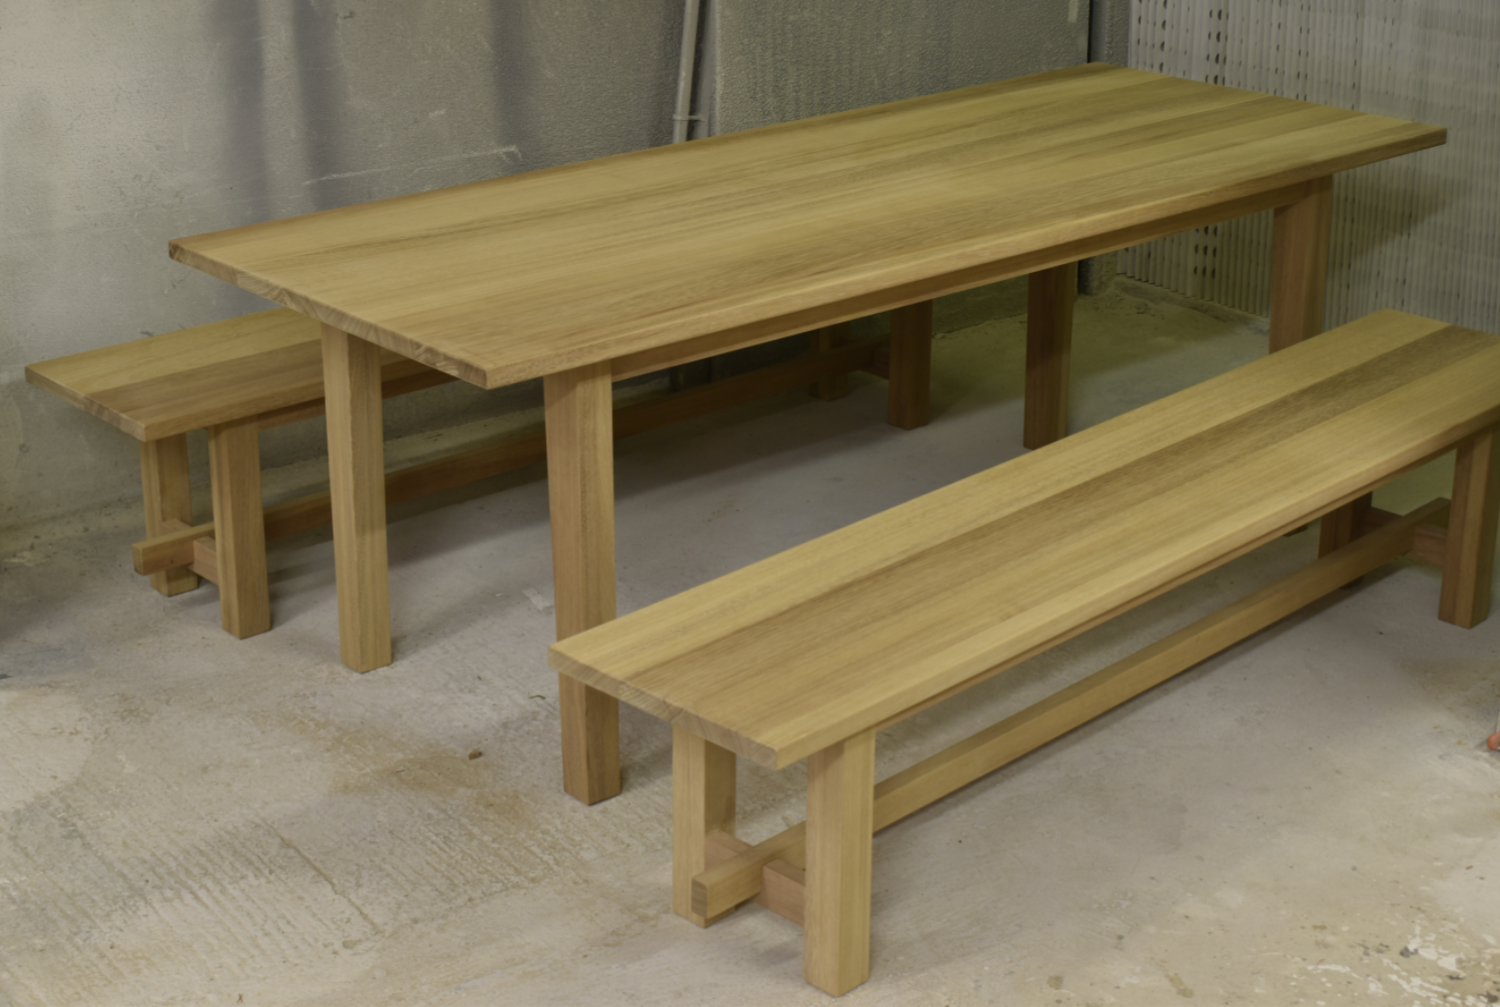 Iroko Kitchen table with bench seating